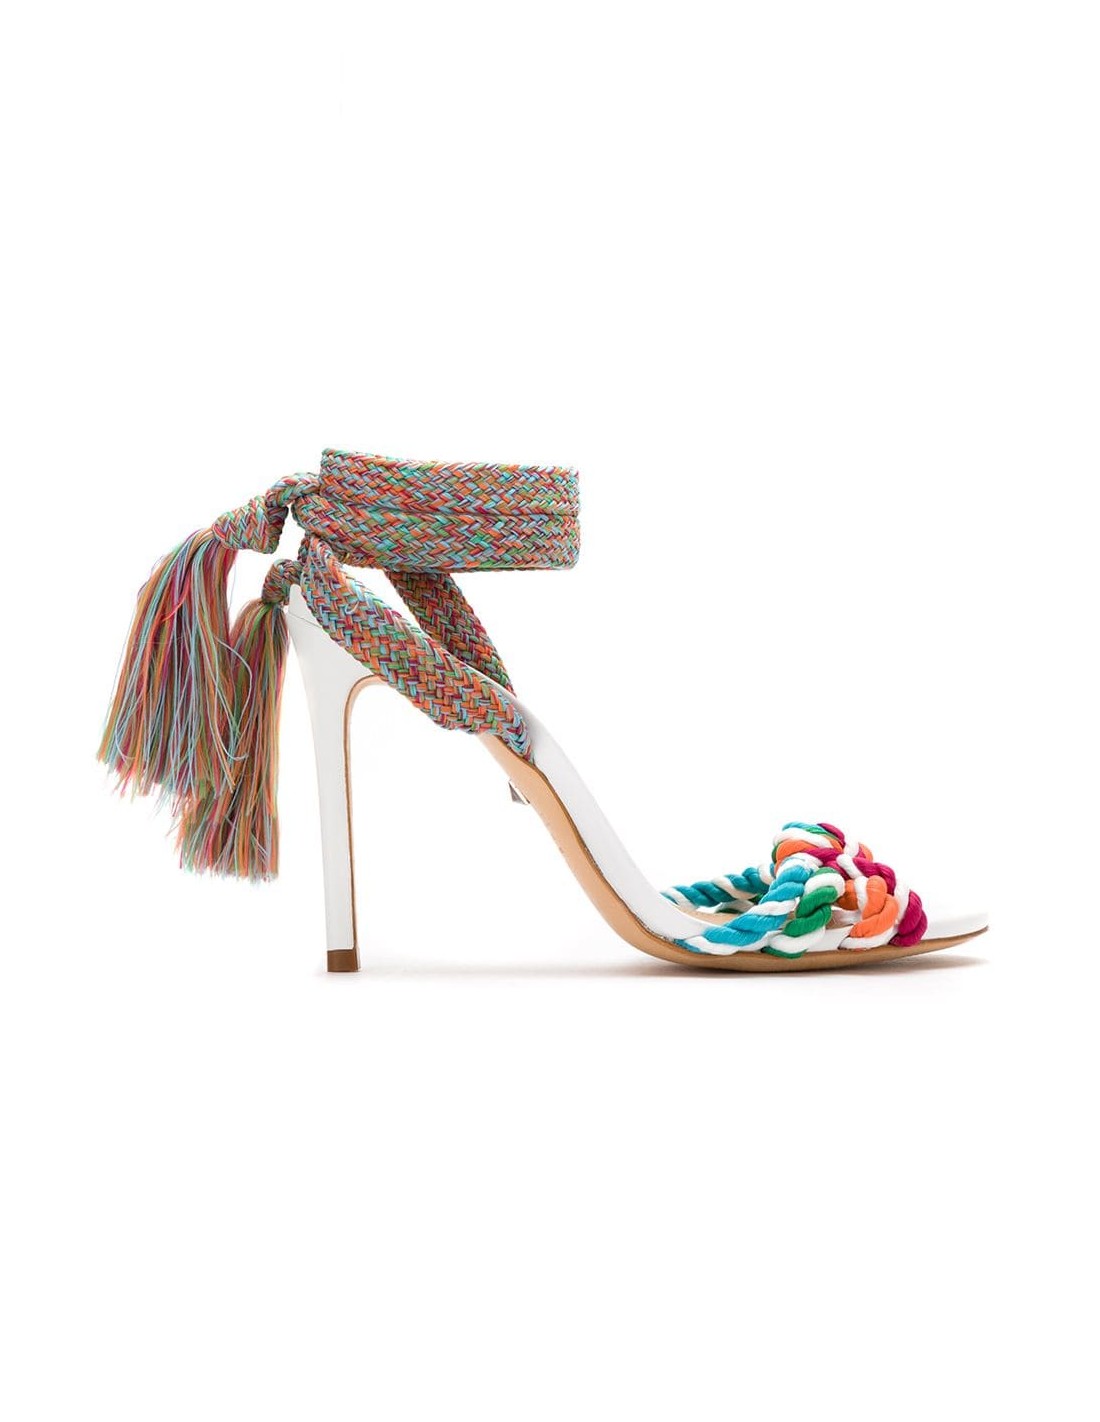 Schutz Sandals with Heel, and Knots Strings